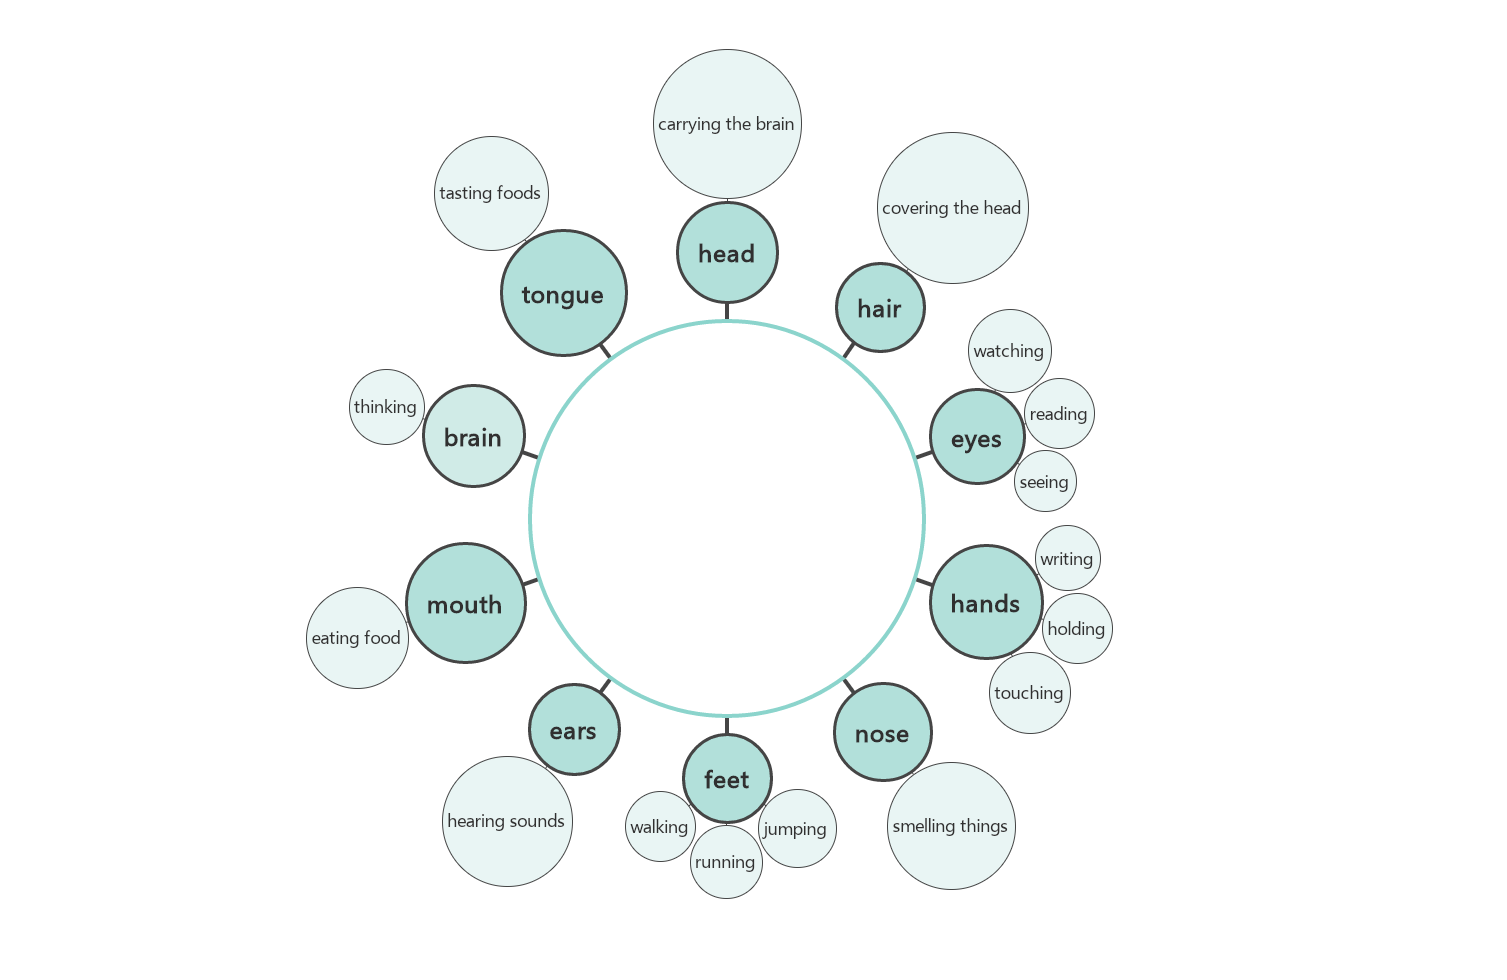 EdrawMind bubble map template